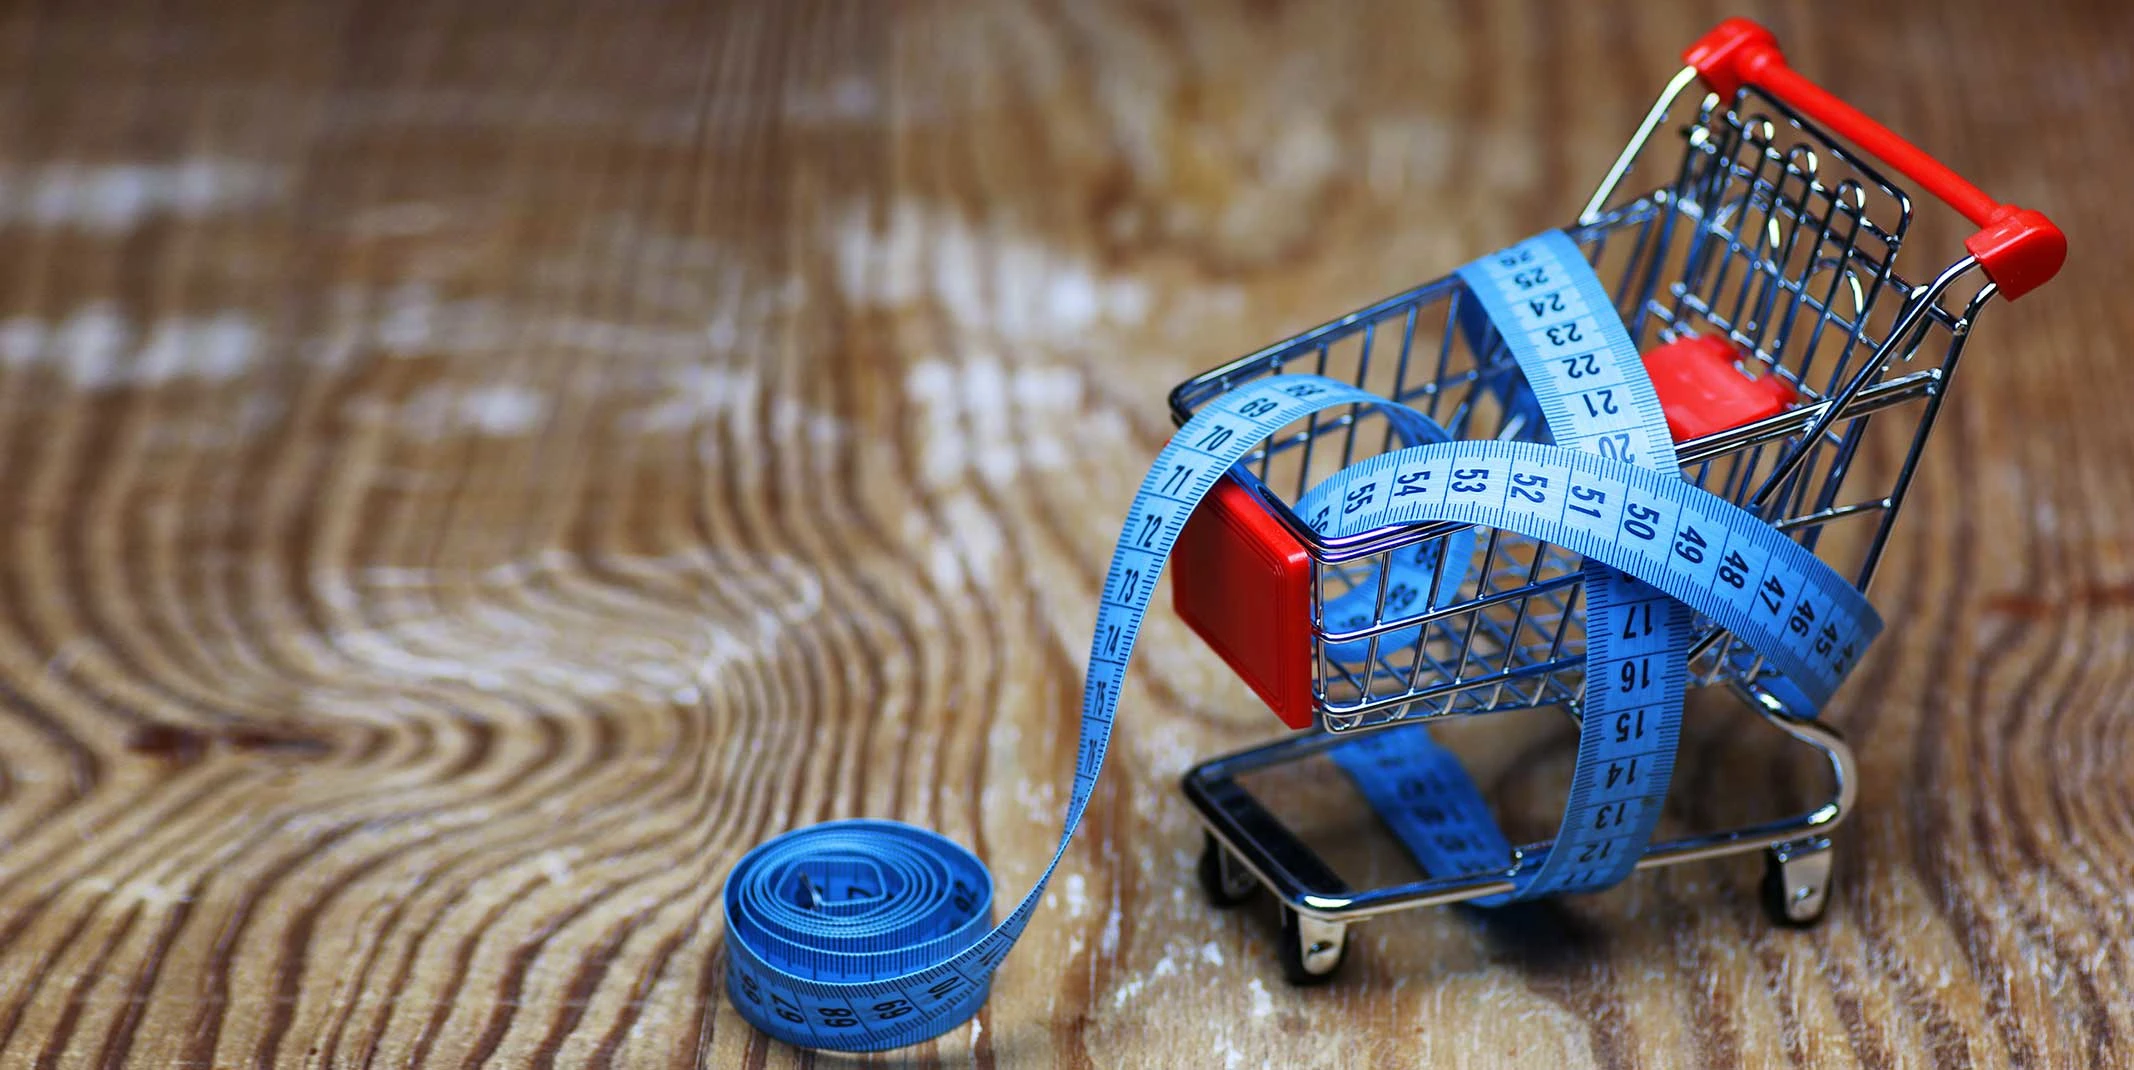 What’s-in-your-basket-credit-alexkich-iStock-859796176